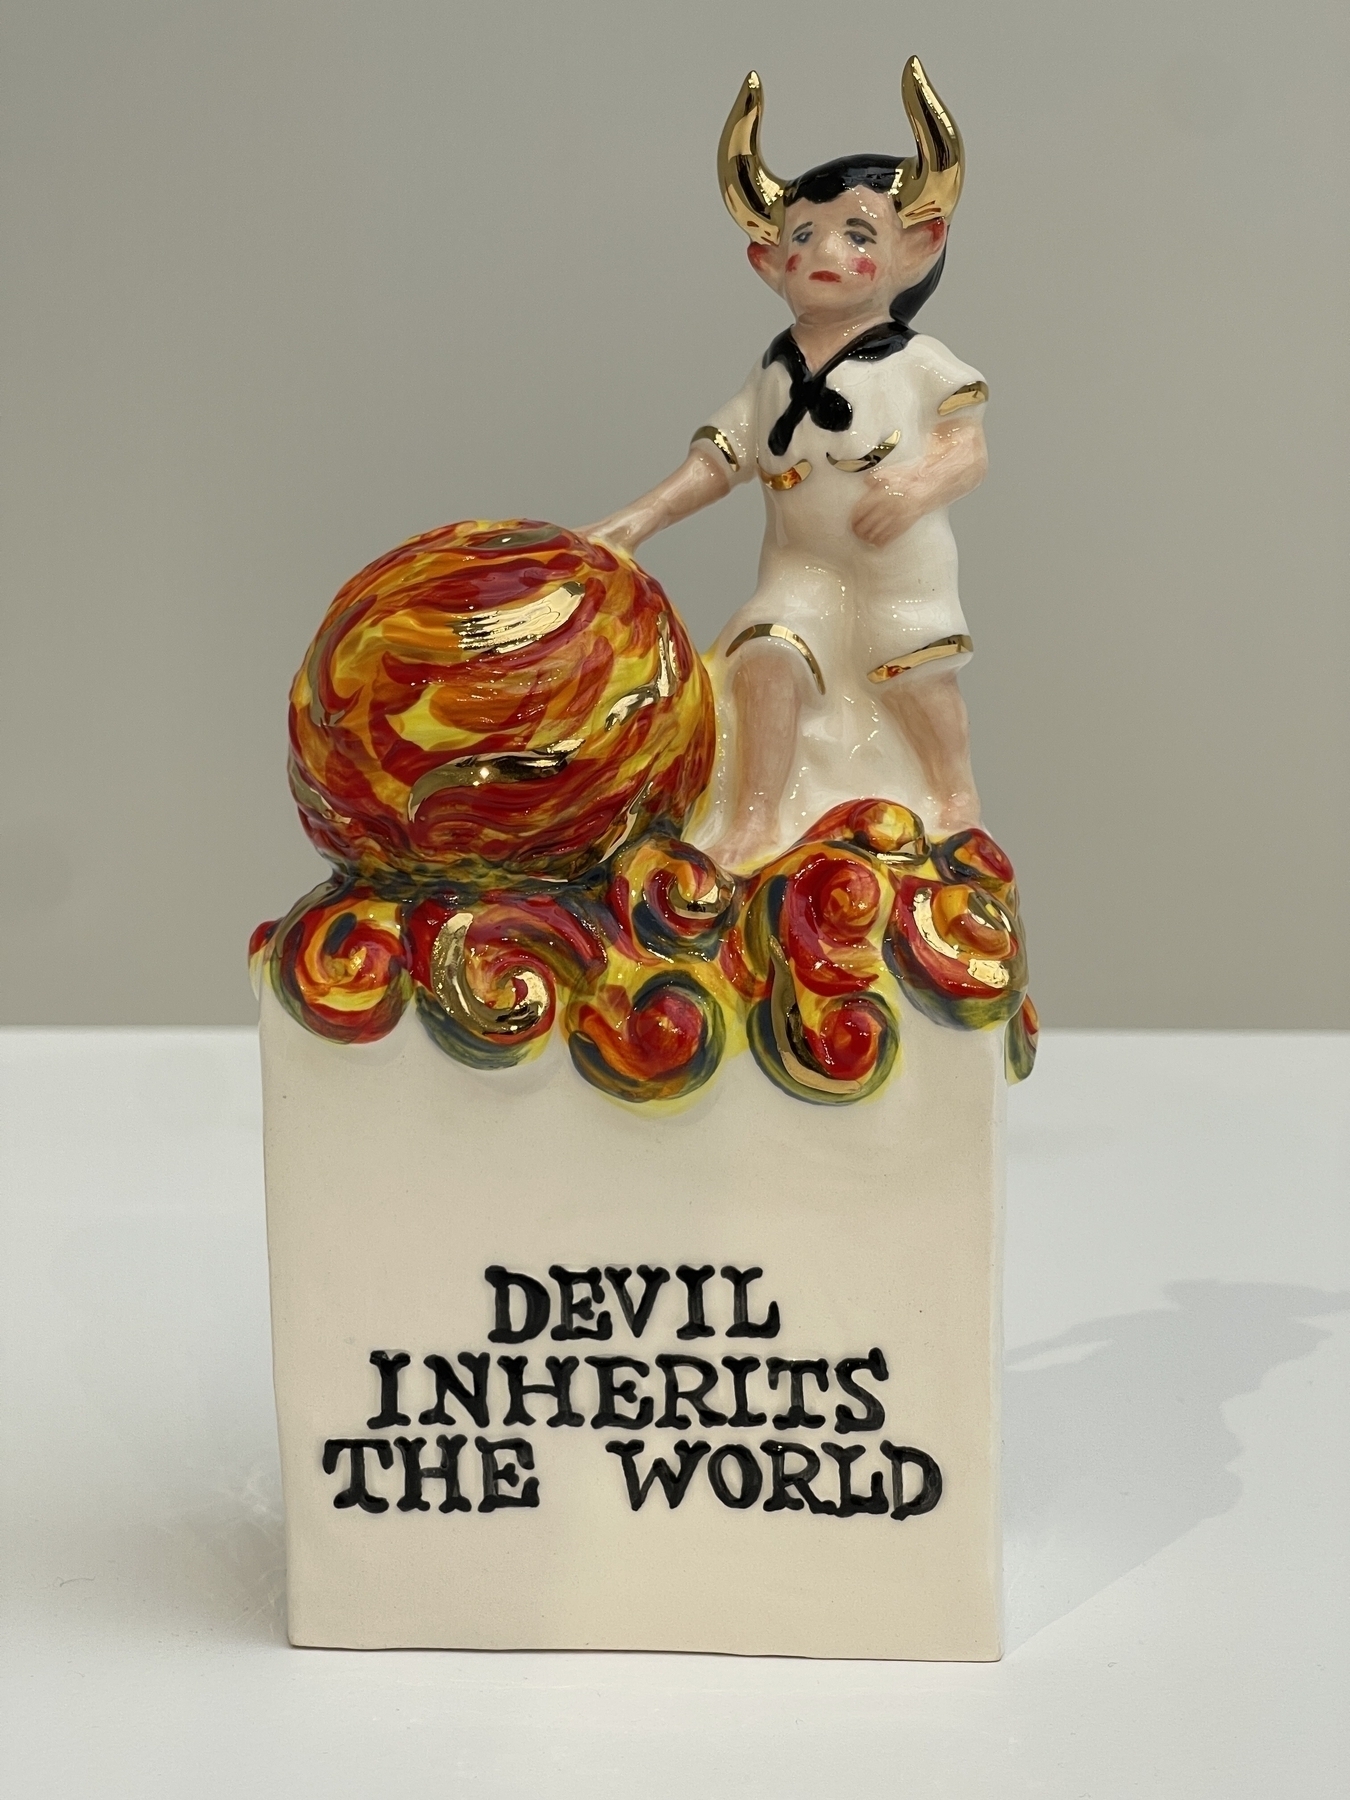 Ceramic figurine of small boy with horns touching a fiery, orange and gold orb with title “Devil Inherits The World”